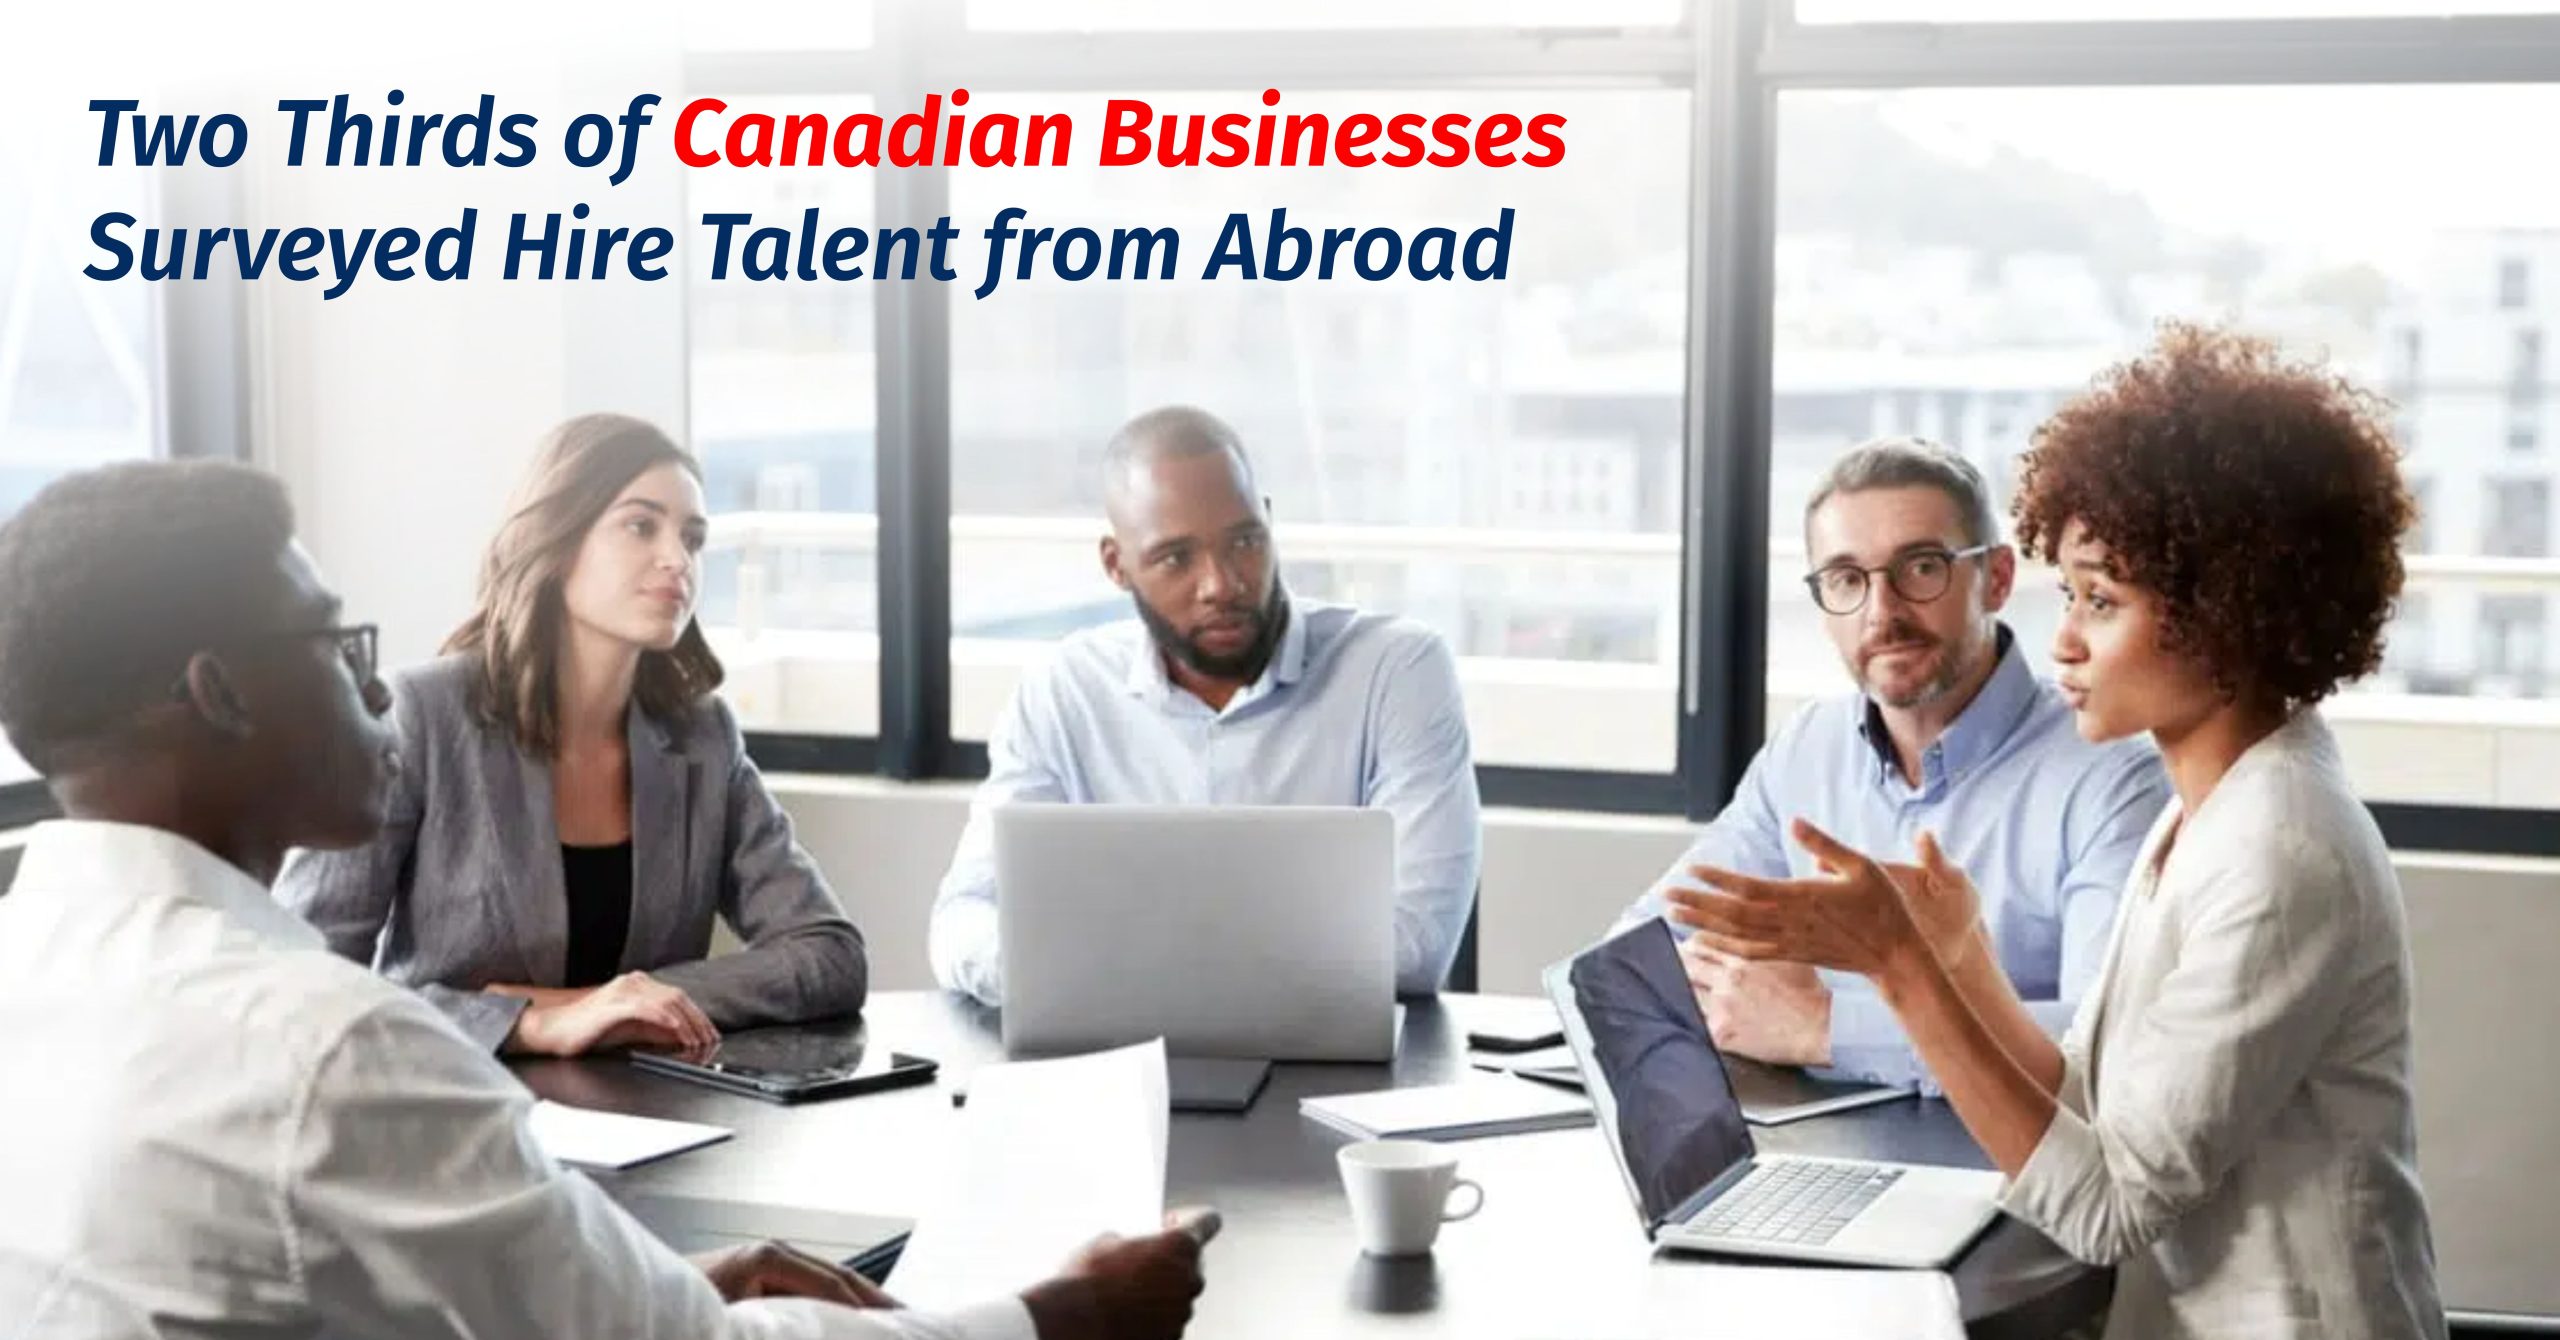 Two thirds of Canadian businesses surveyed hire talent from abroad